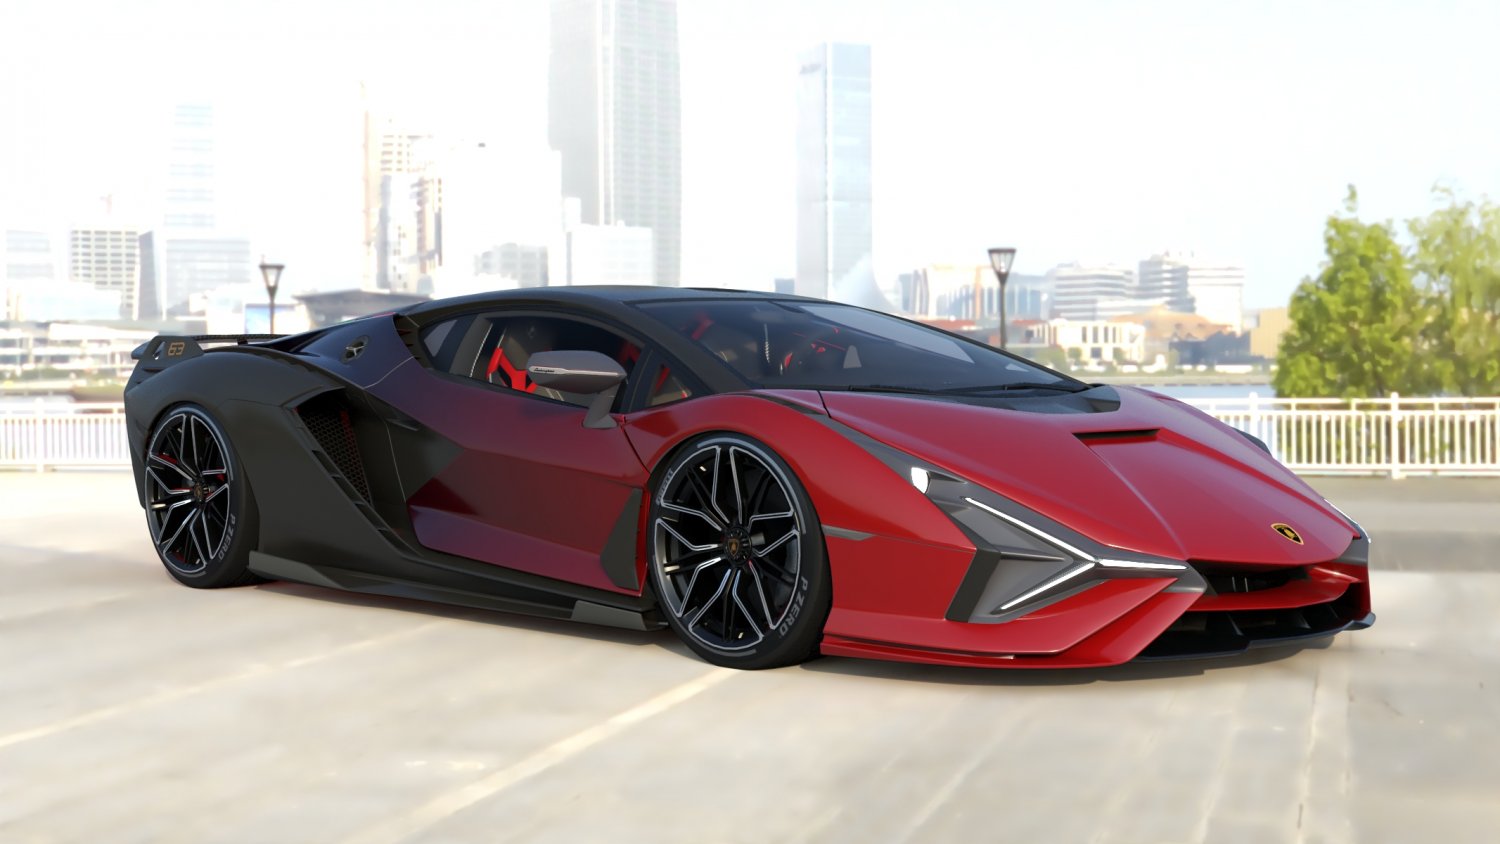 The Lamborghini Sián FKP 37 offers the most customisations ever - 3Dnatives